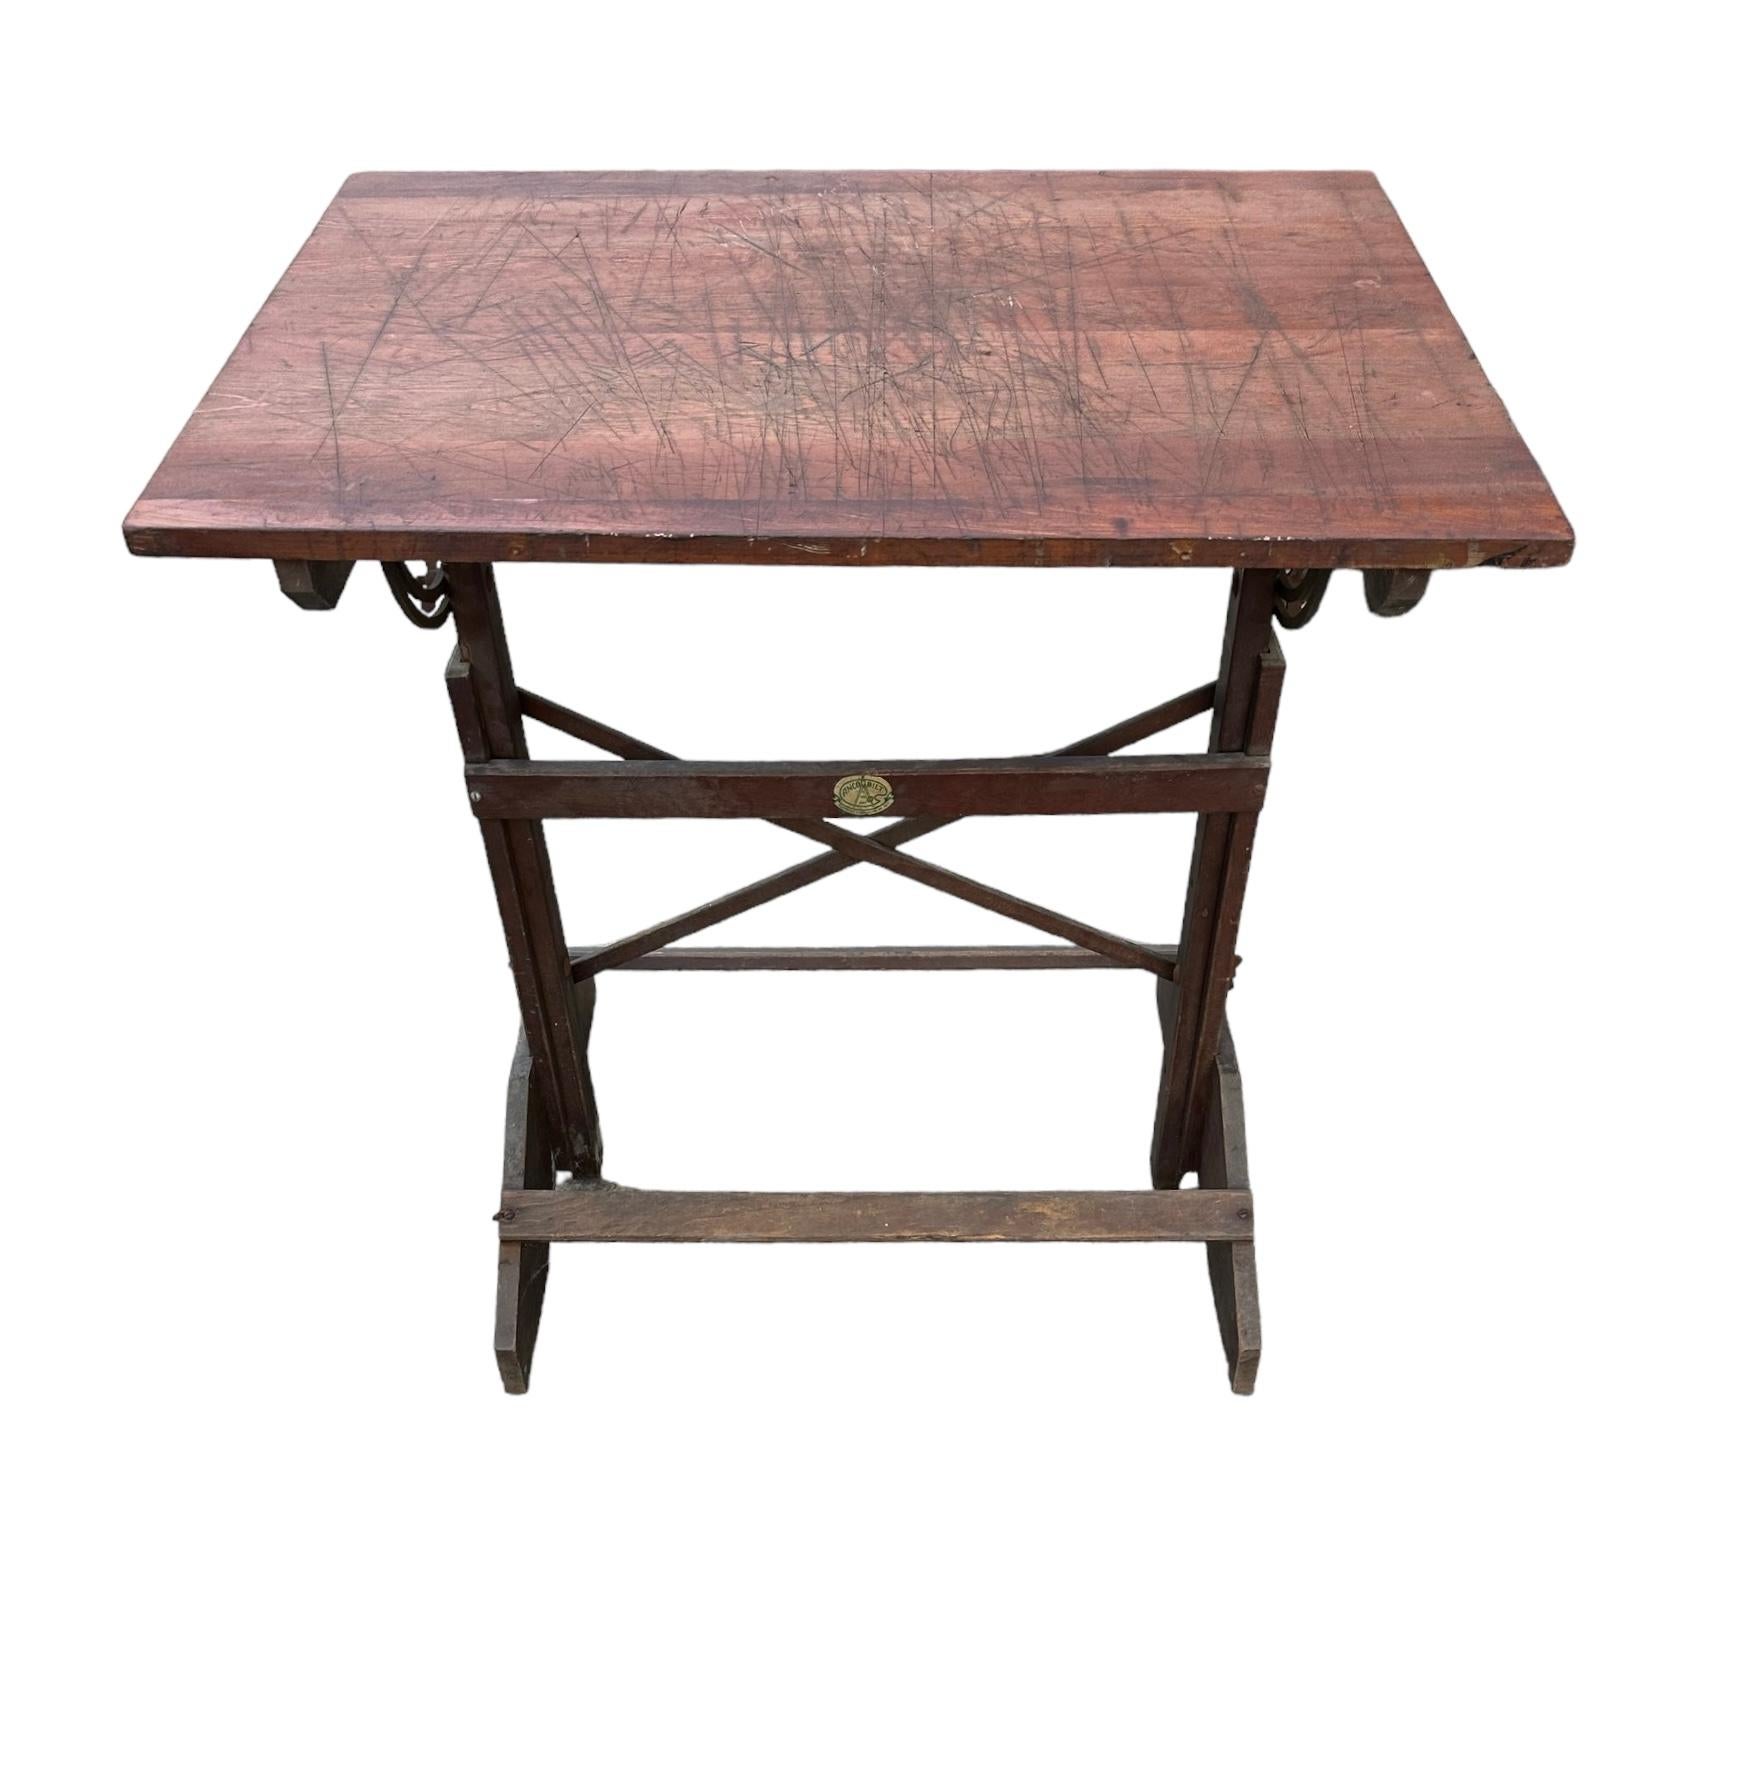 Elegant antique drafting table with adjustable height and angle. Made in Brooklyn by Anco Bilt, constructed of solid wood with metal hardware. A  relic of an earlier time, this table definitely has a hard earned heavy patina from use by an